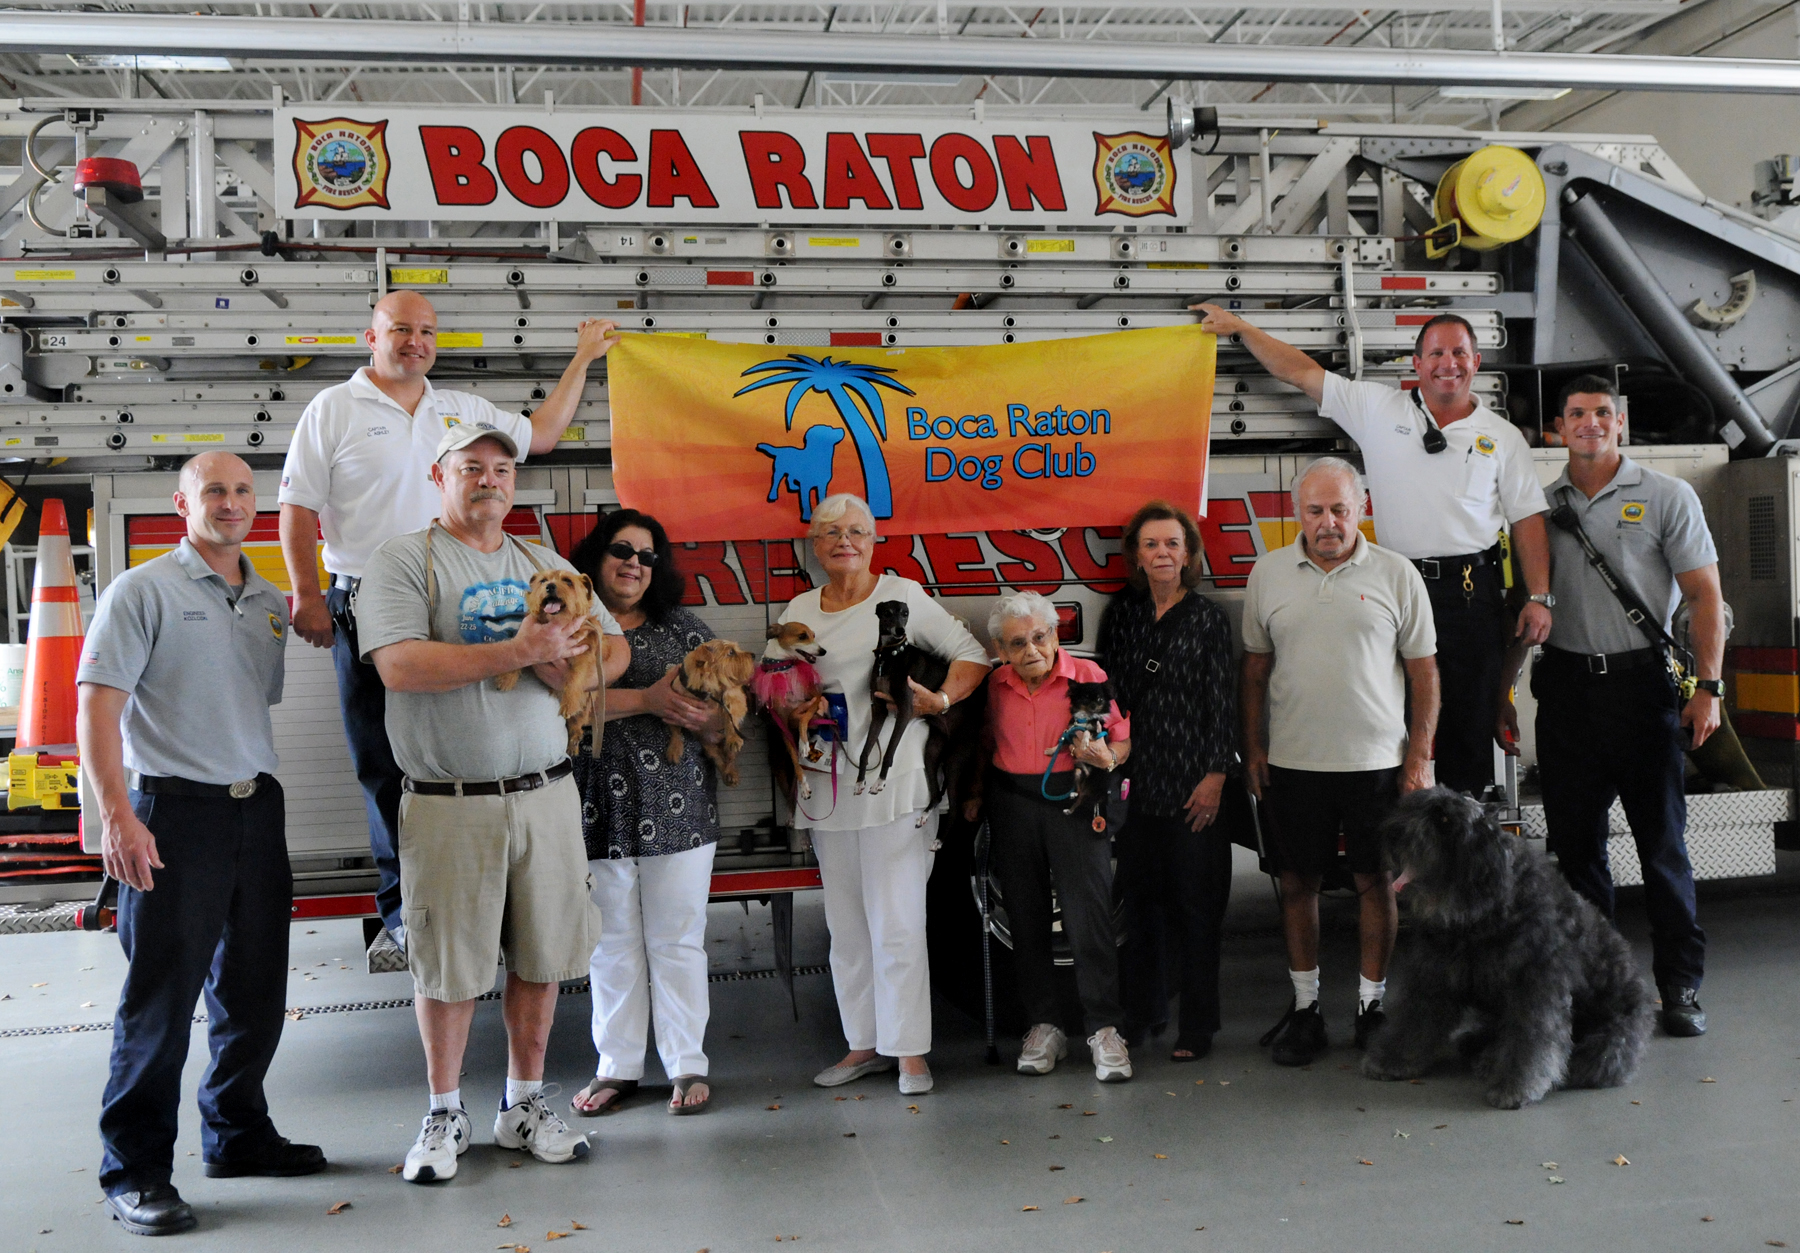 FPG-BRF-FIREDOG-0812a FPG photo/Marta Mikulan Martin 7/31/15 July 31 2015: The Boca Raton Dog Club was donating pet oxygen mask to Boca Raton Fire Rescue. The club is doing with profits from their recent American Kennel Club Dog Show.. At Fire Station #5, members of the club and squad members are sharing a photo to celebrate the donation.